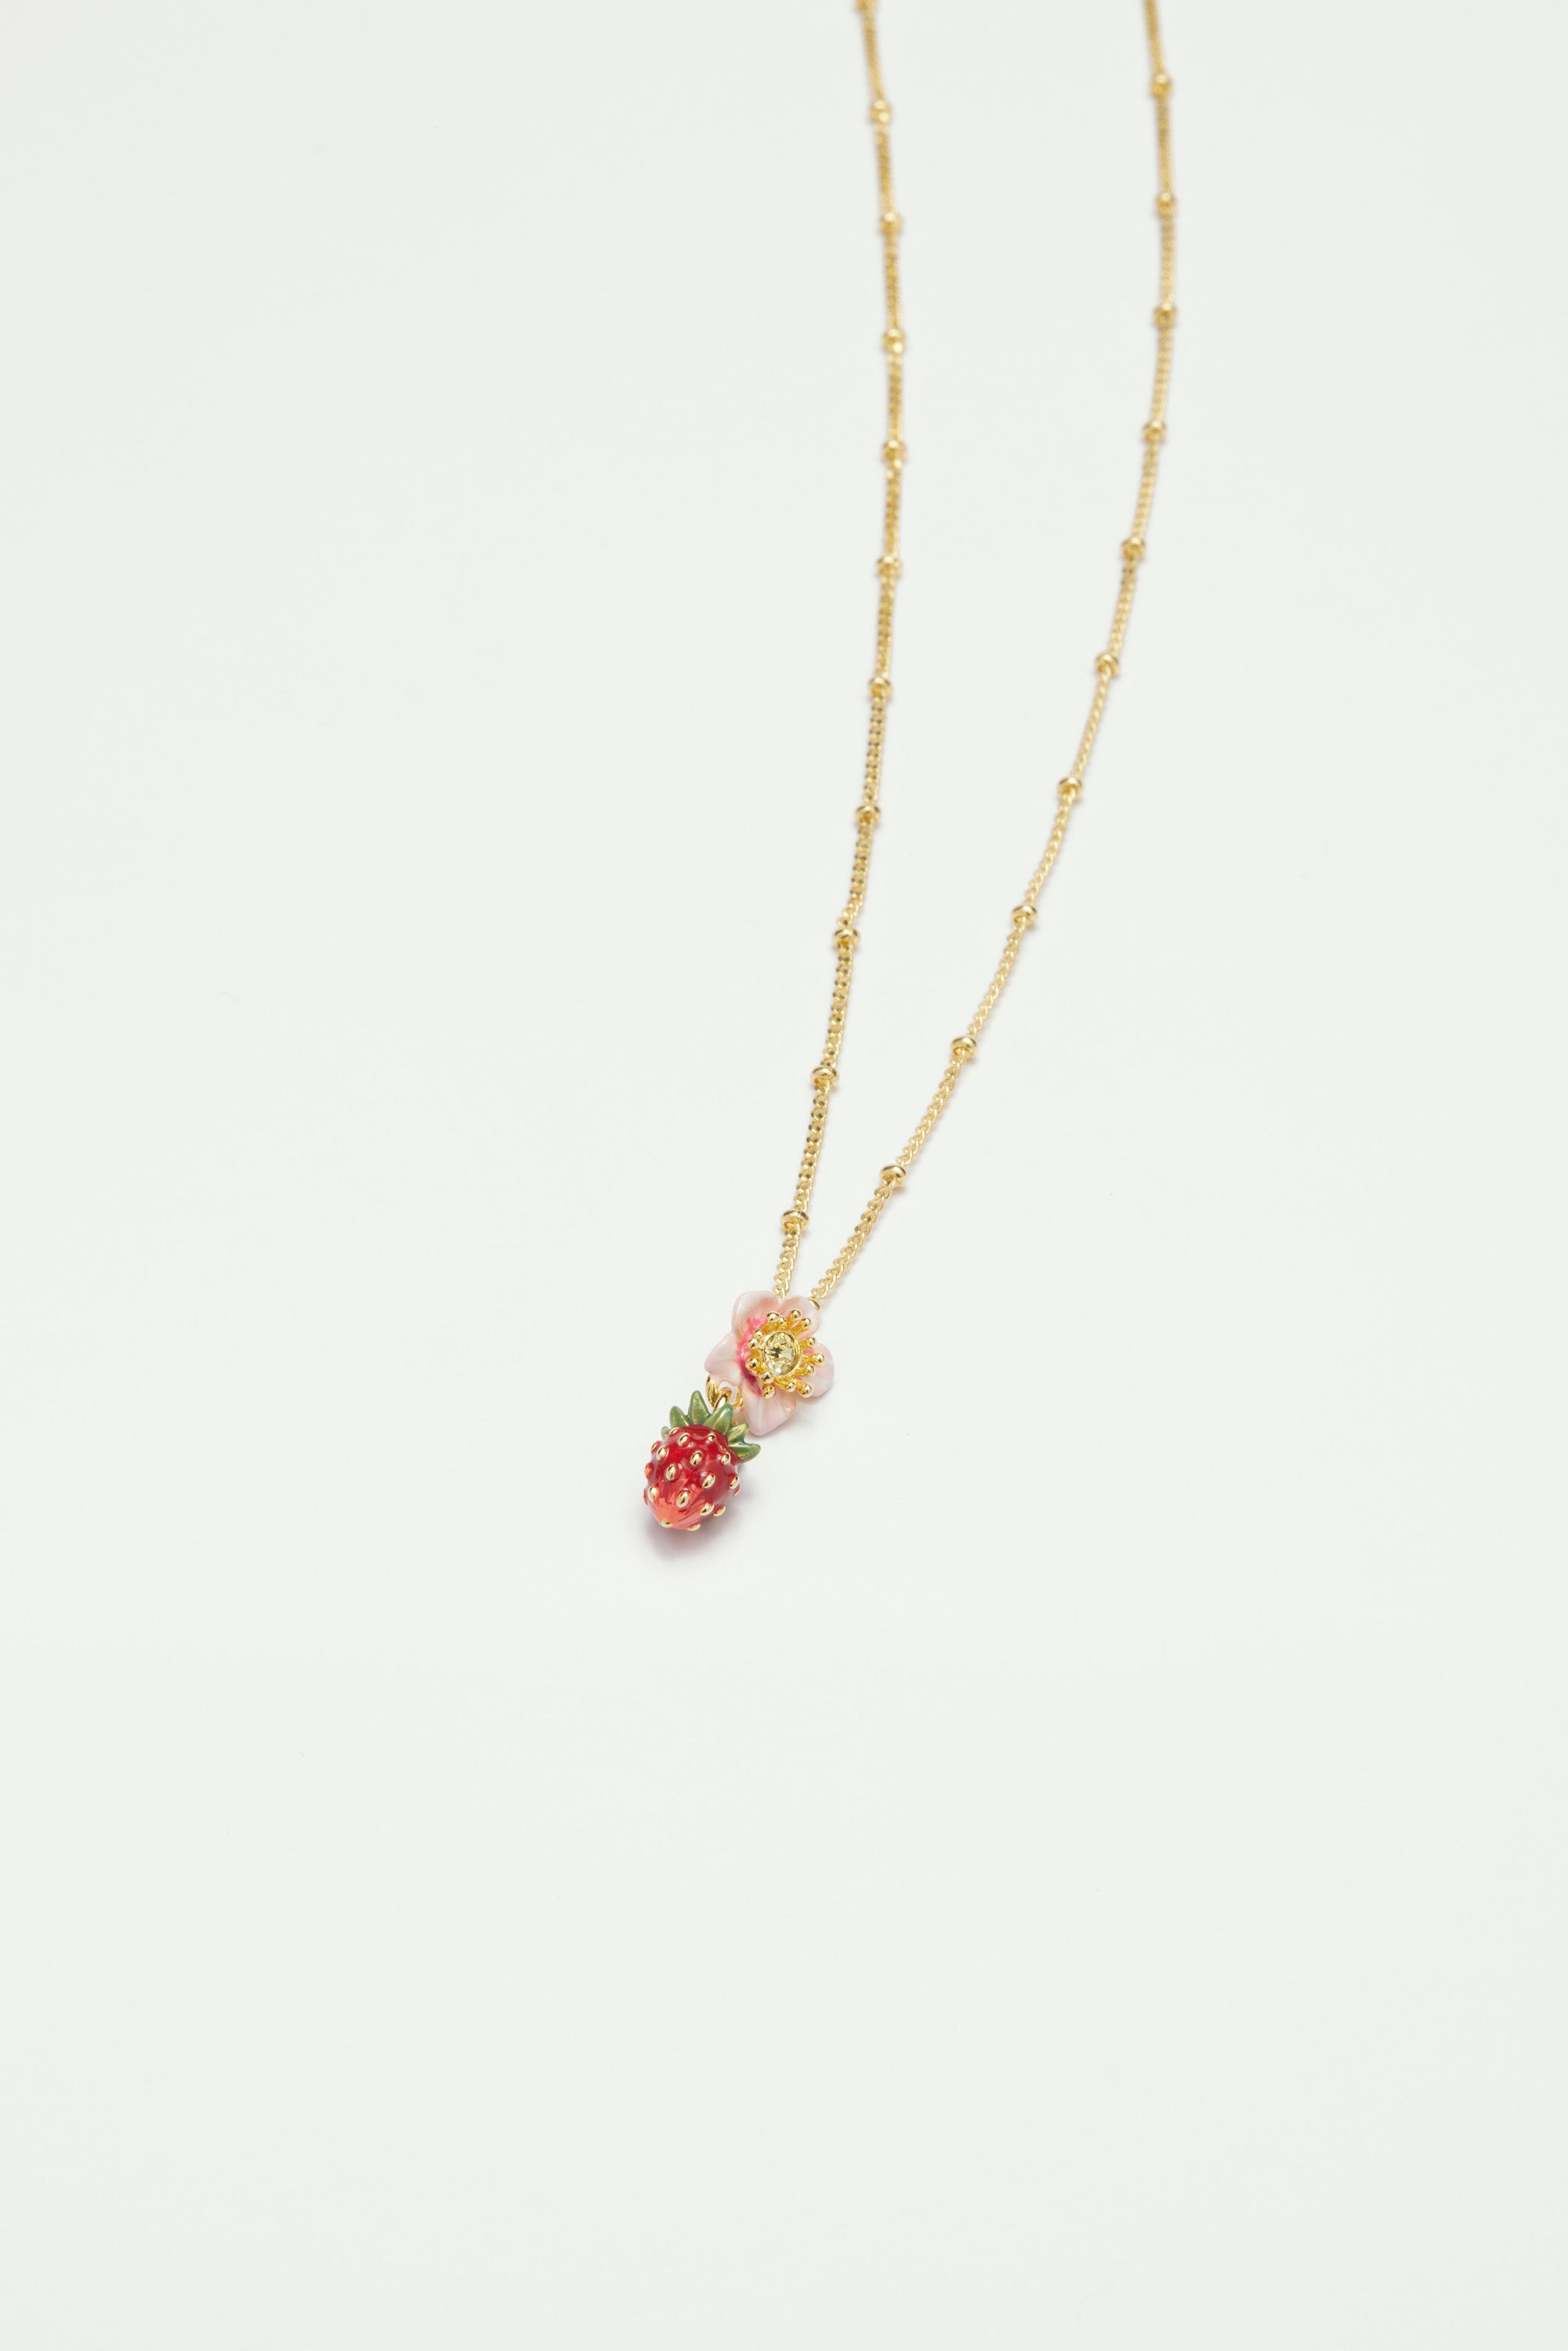 Wild strawberry and pink flower pendant necklace